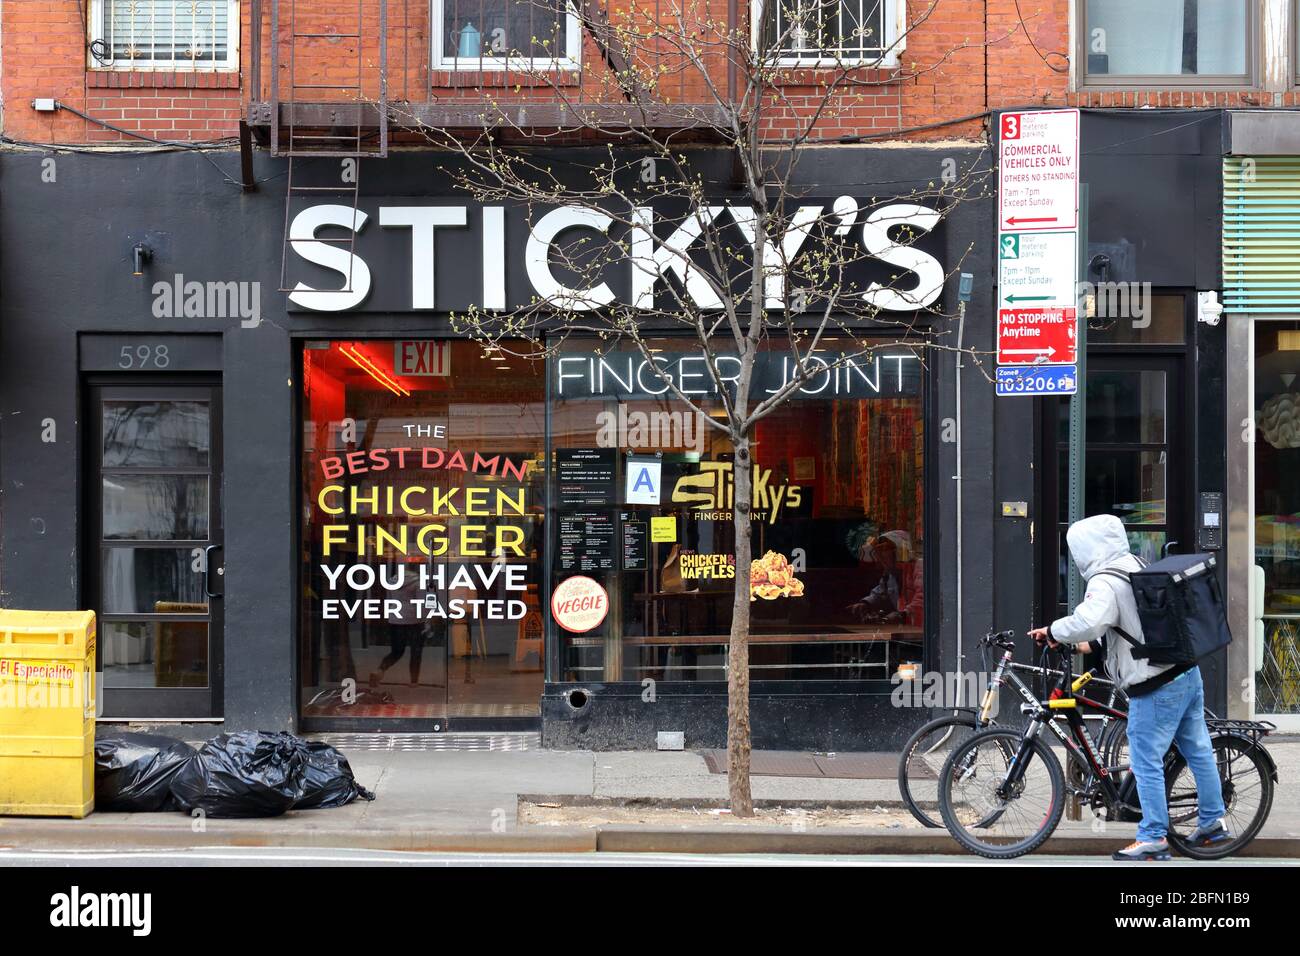 Sticky's Finger Joint, 598 9th Ave, New York, NY. exterior storefront of a chicken fingers restaurant in the Hells Kitchen neighborhood of Manhattan. Stock Photo